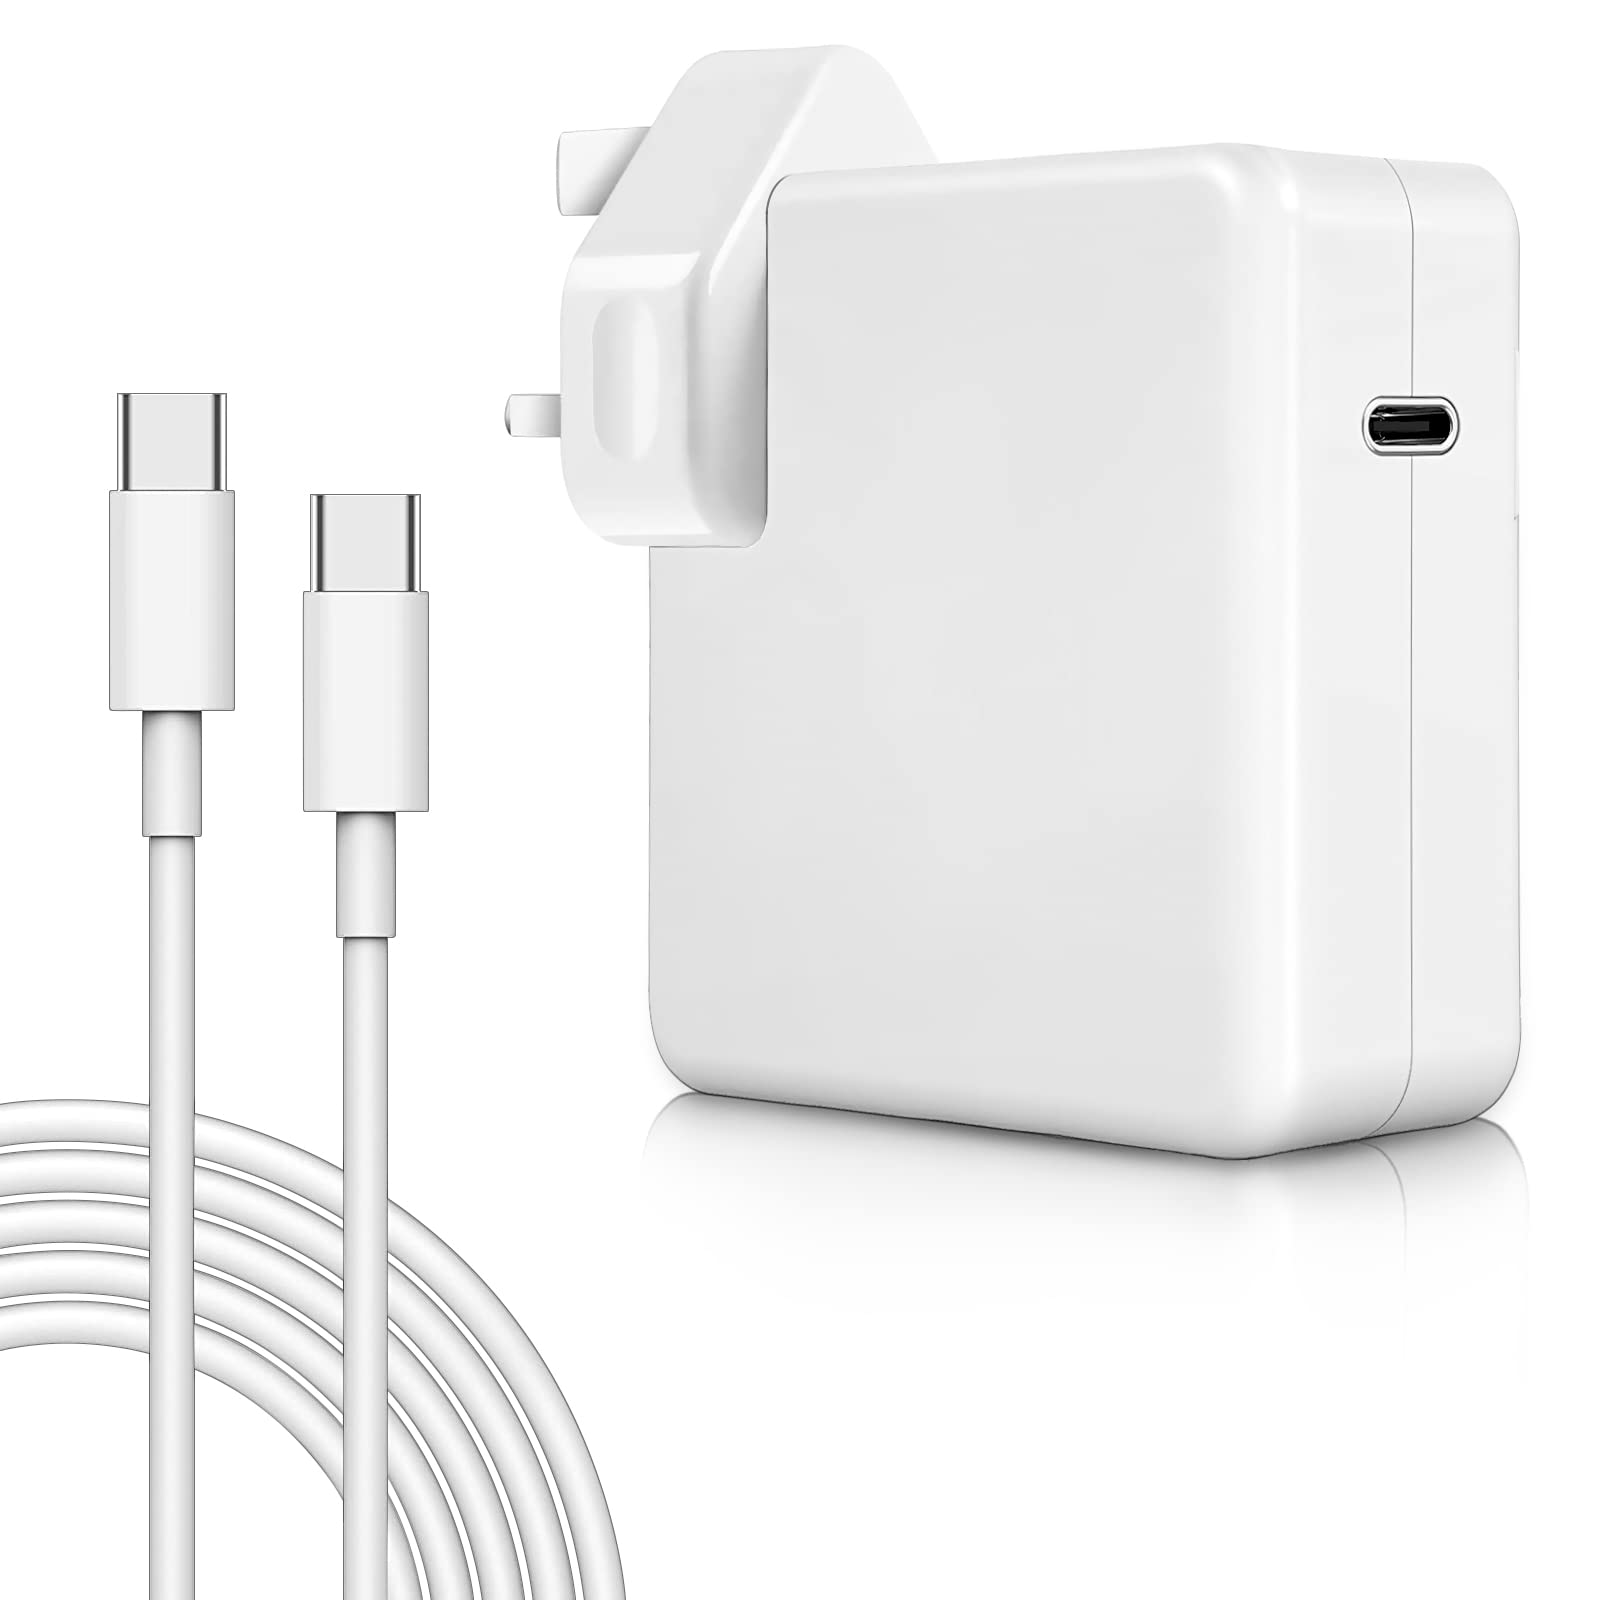 INTPIHP MacBook Pro Charger-96W USB C Charger Power Adapter Compatible with Mac Book 13 14 15 16 inch, Air 2018 2019 2020 inch, New iPad 12.9/11 inch, Included to Cable(7.2ft/2.2m)